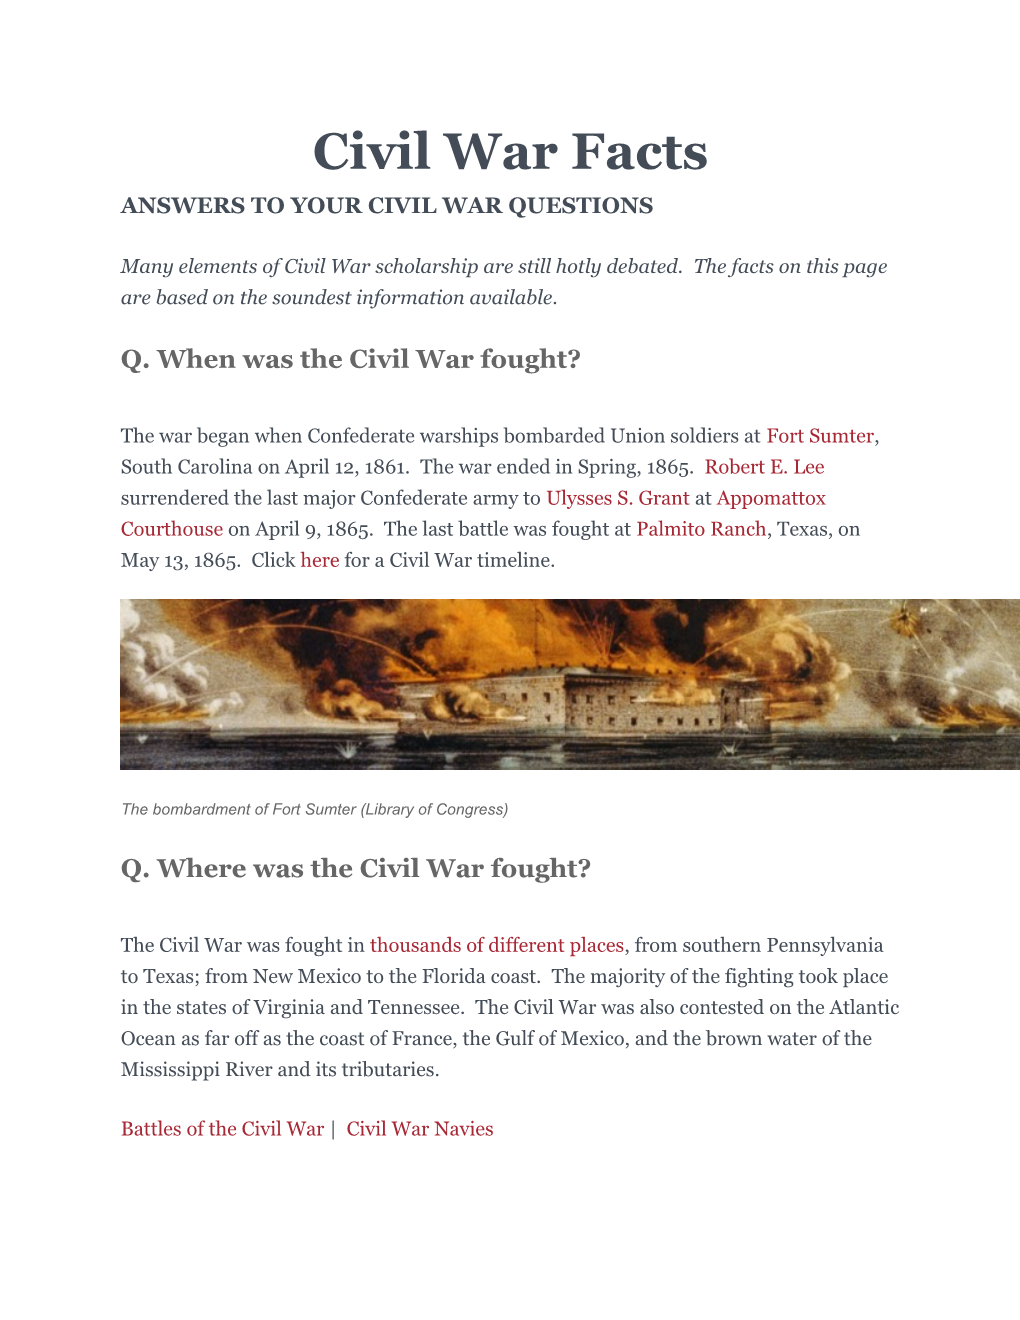 Answers to Your Civil War Questions